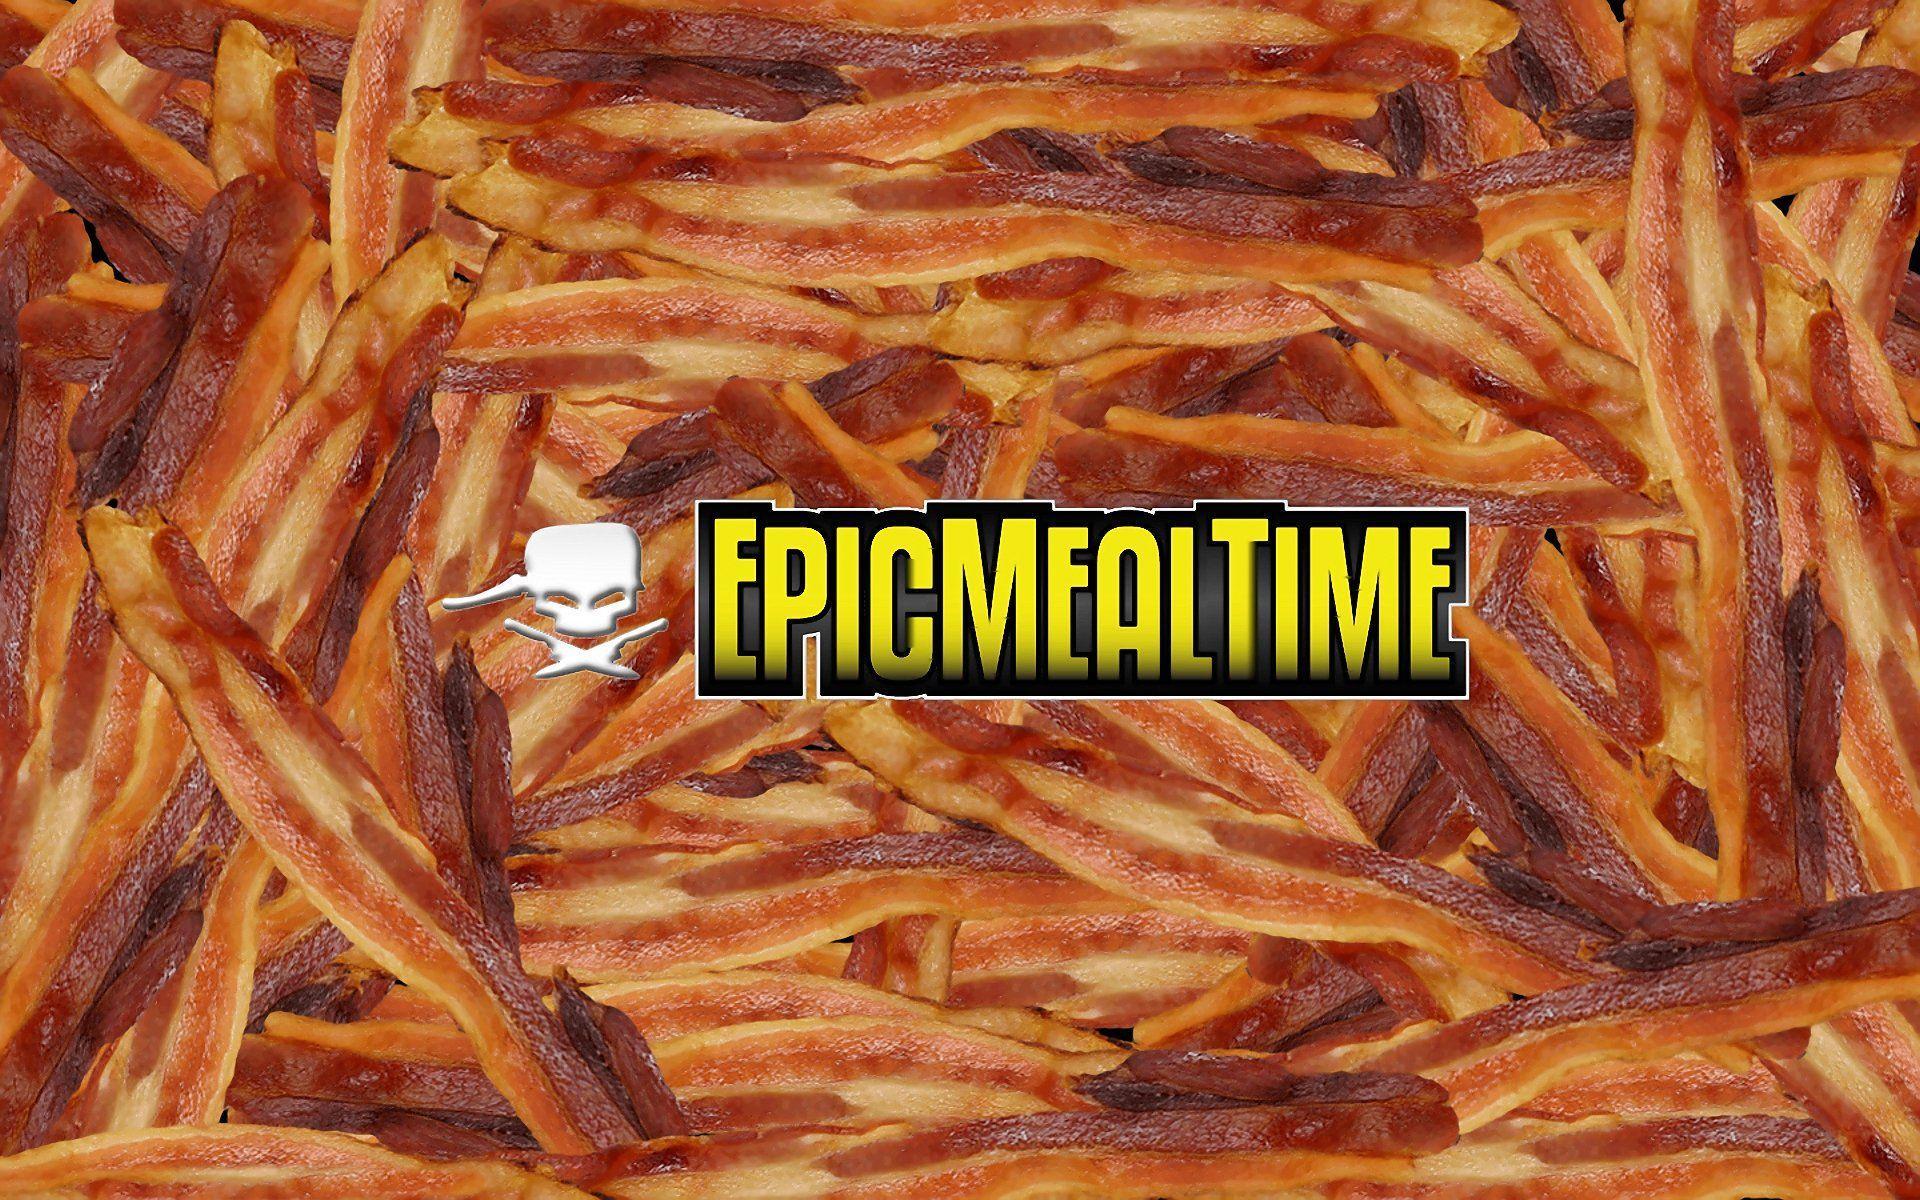 Bacon Epic Meal Time wallpaperx1200